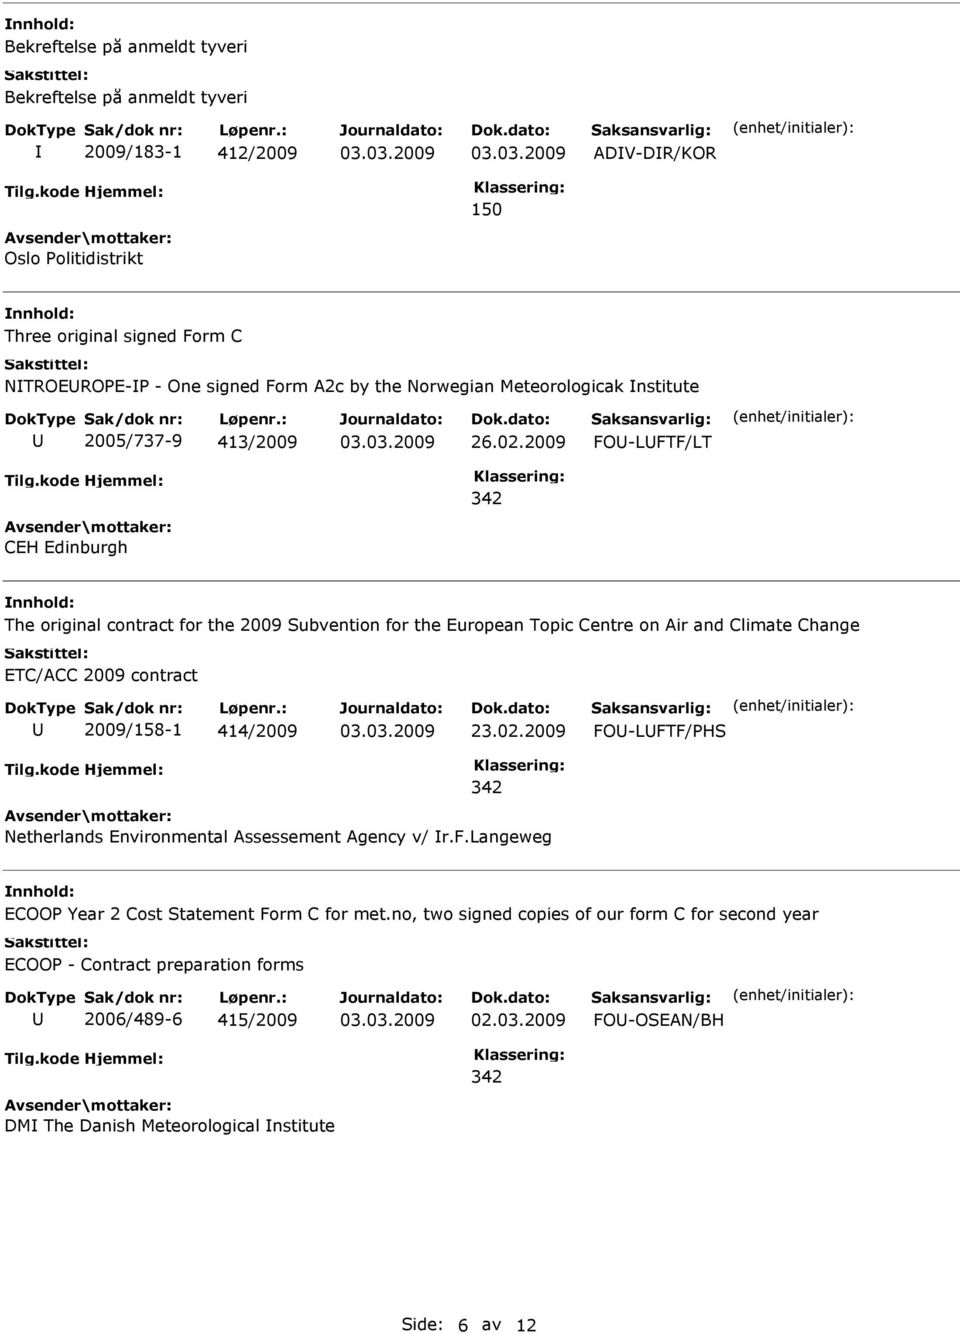 Climate Change ETC/ACC 2009 contract 2009/158-1 414/2009 23.02.2009 FO-LFTF/PHS Netherlands Environmental Assessement Agency v/ r.f.